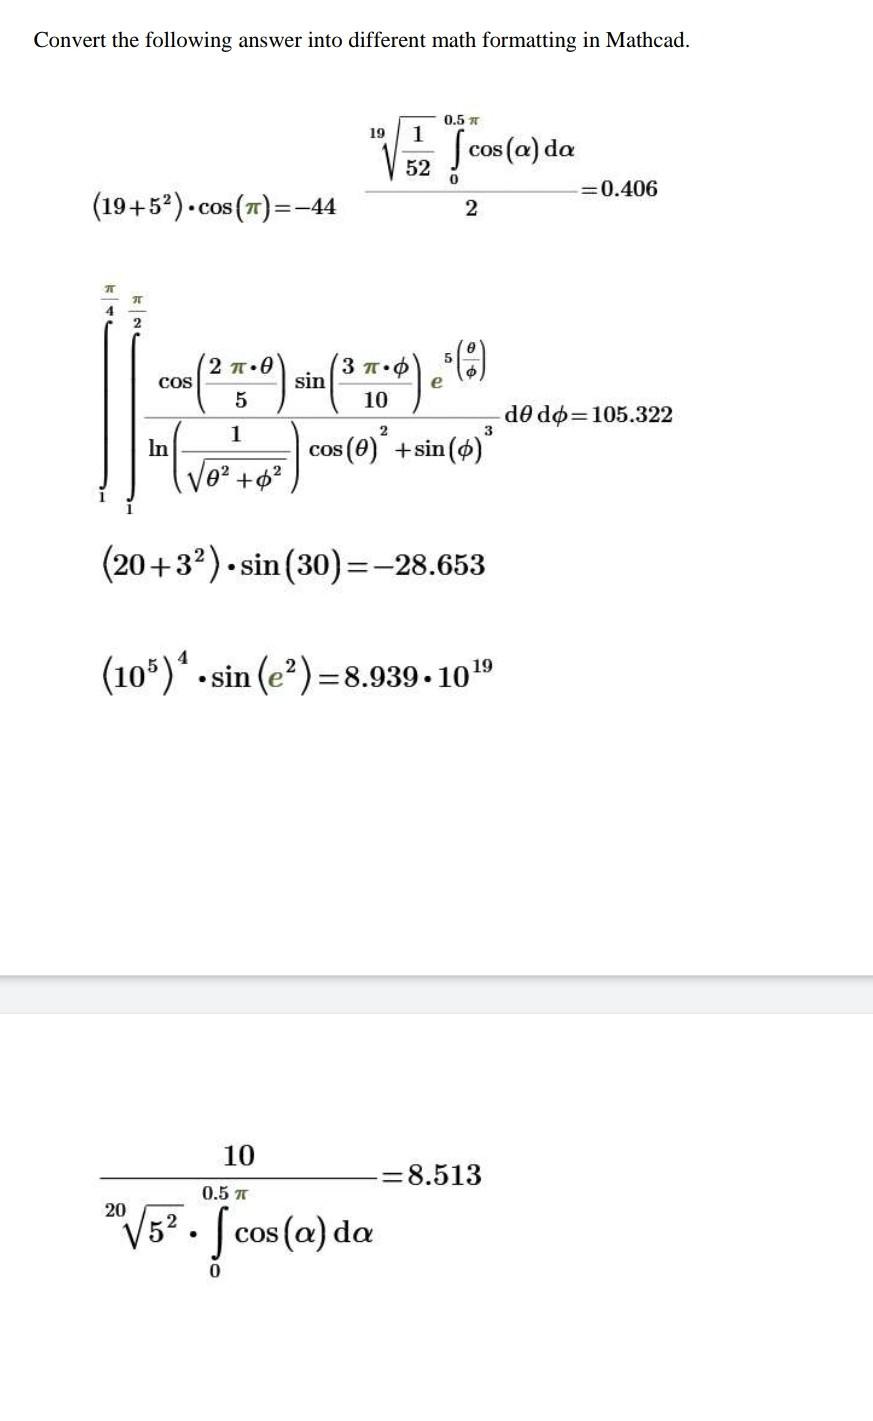 SOLVED: need answers for the math questions Convert the following